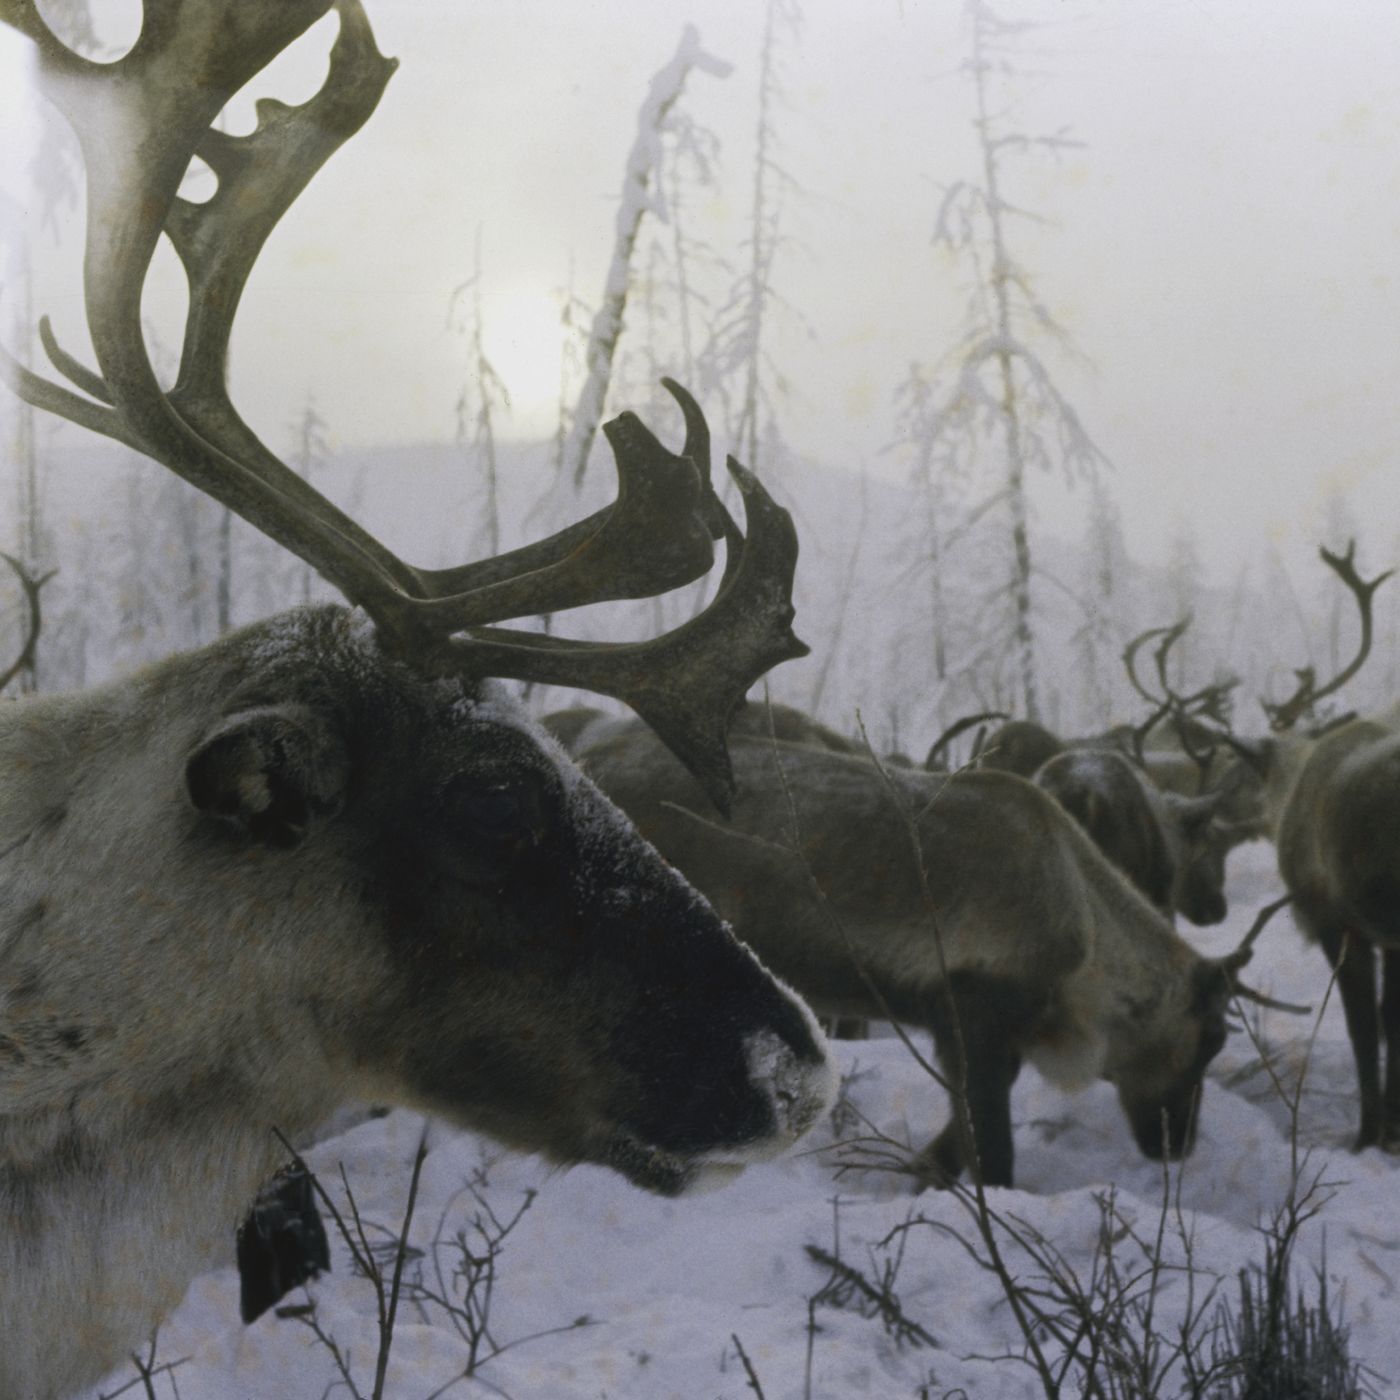 Arctic reindeer and caribou have declined by more than half